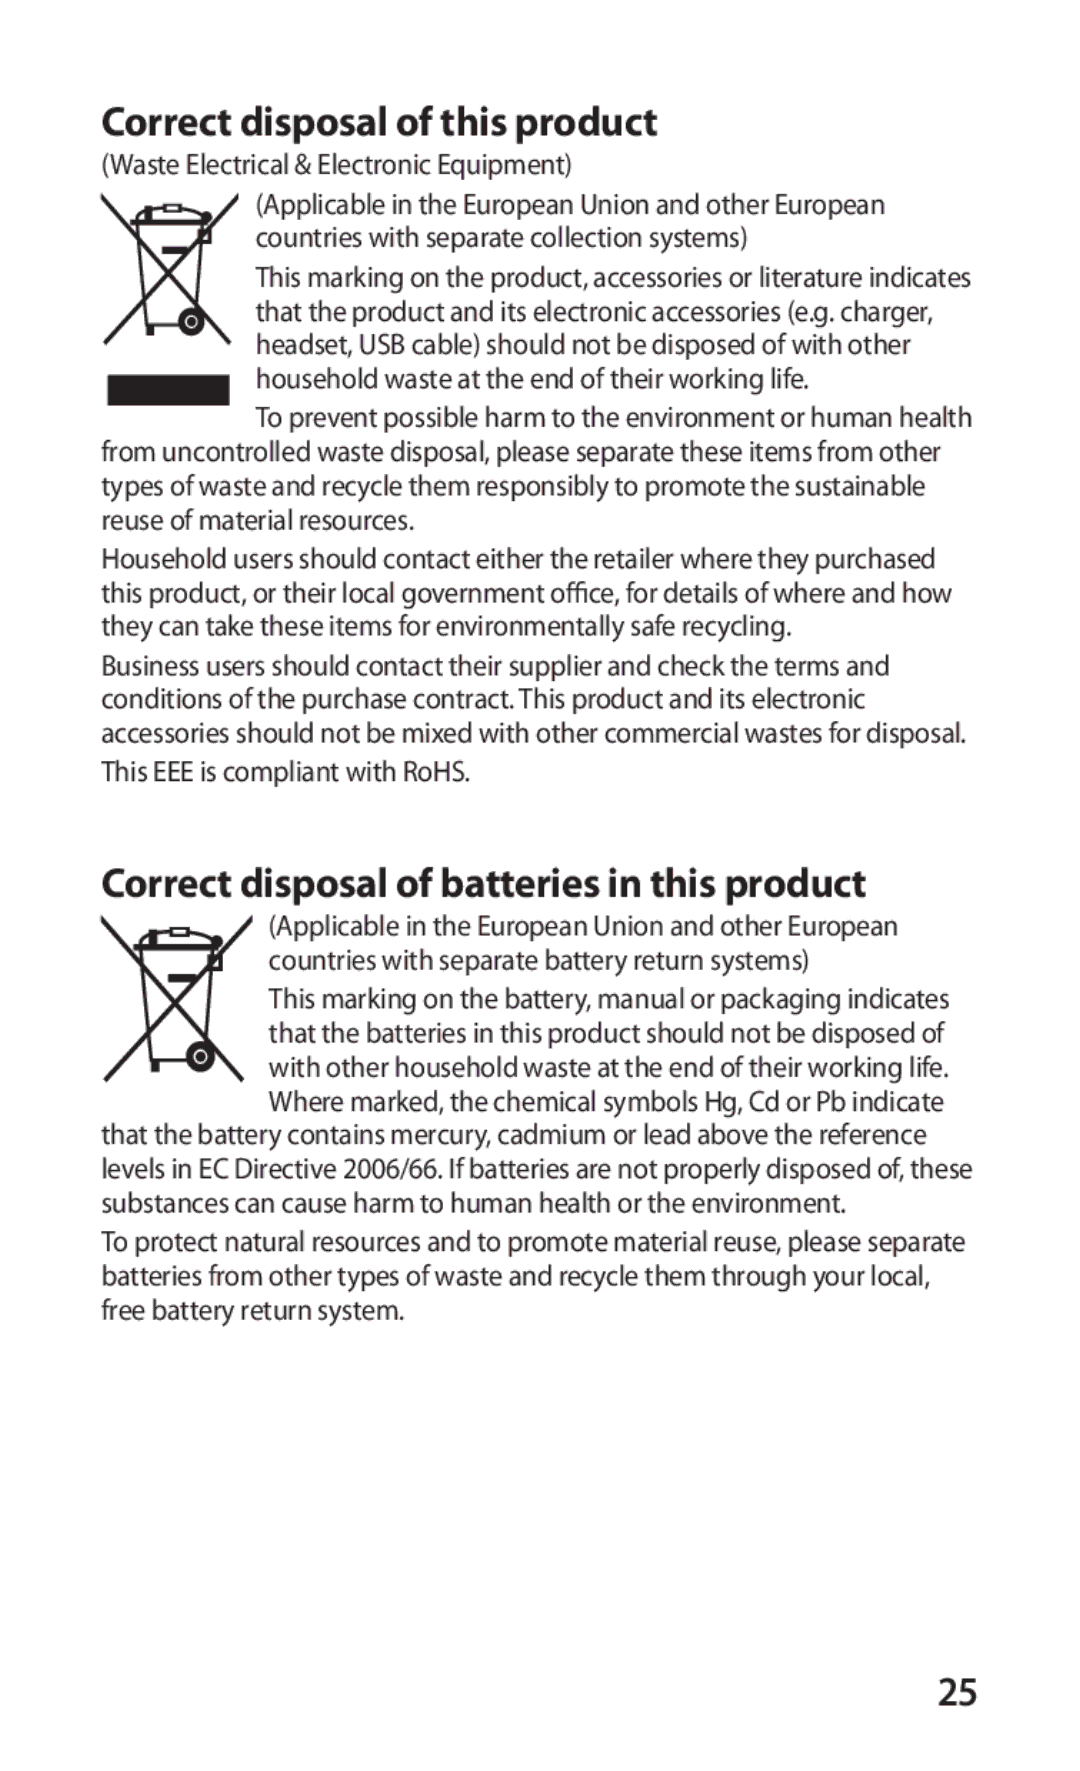 Samsung GT-C6712LKAEUR, GT-C6712RWAXSK Correct disposal of this product, Correct disposal of batteries in this product 